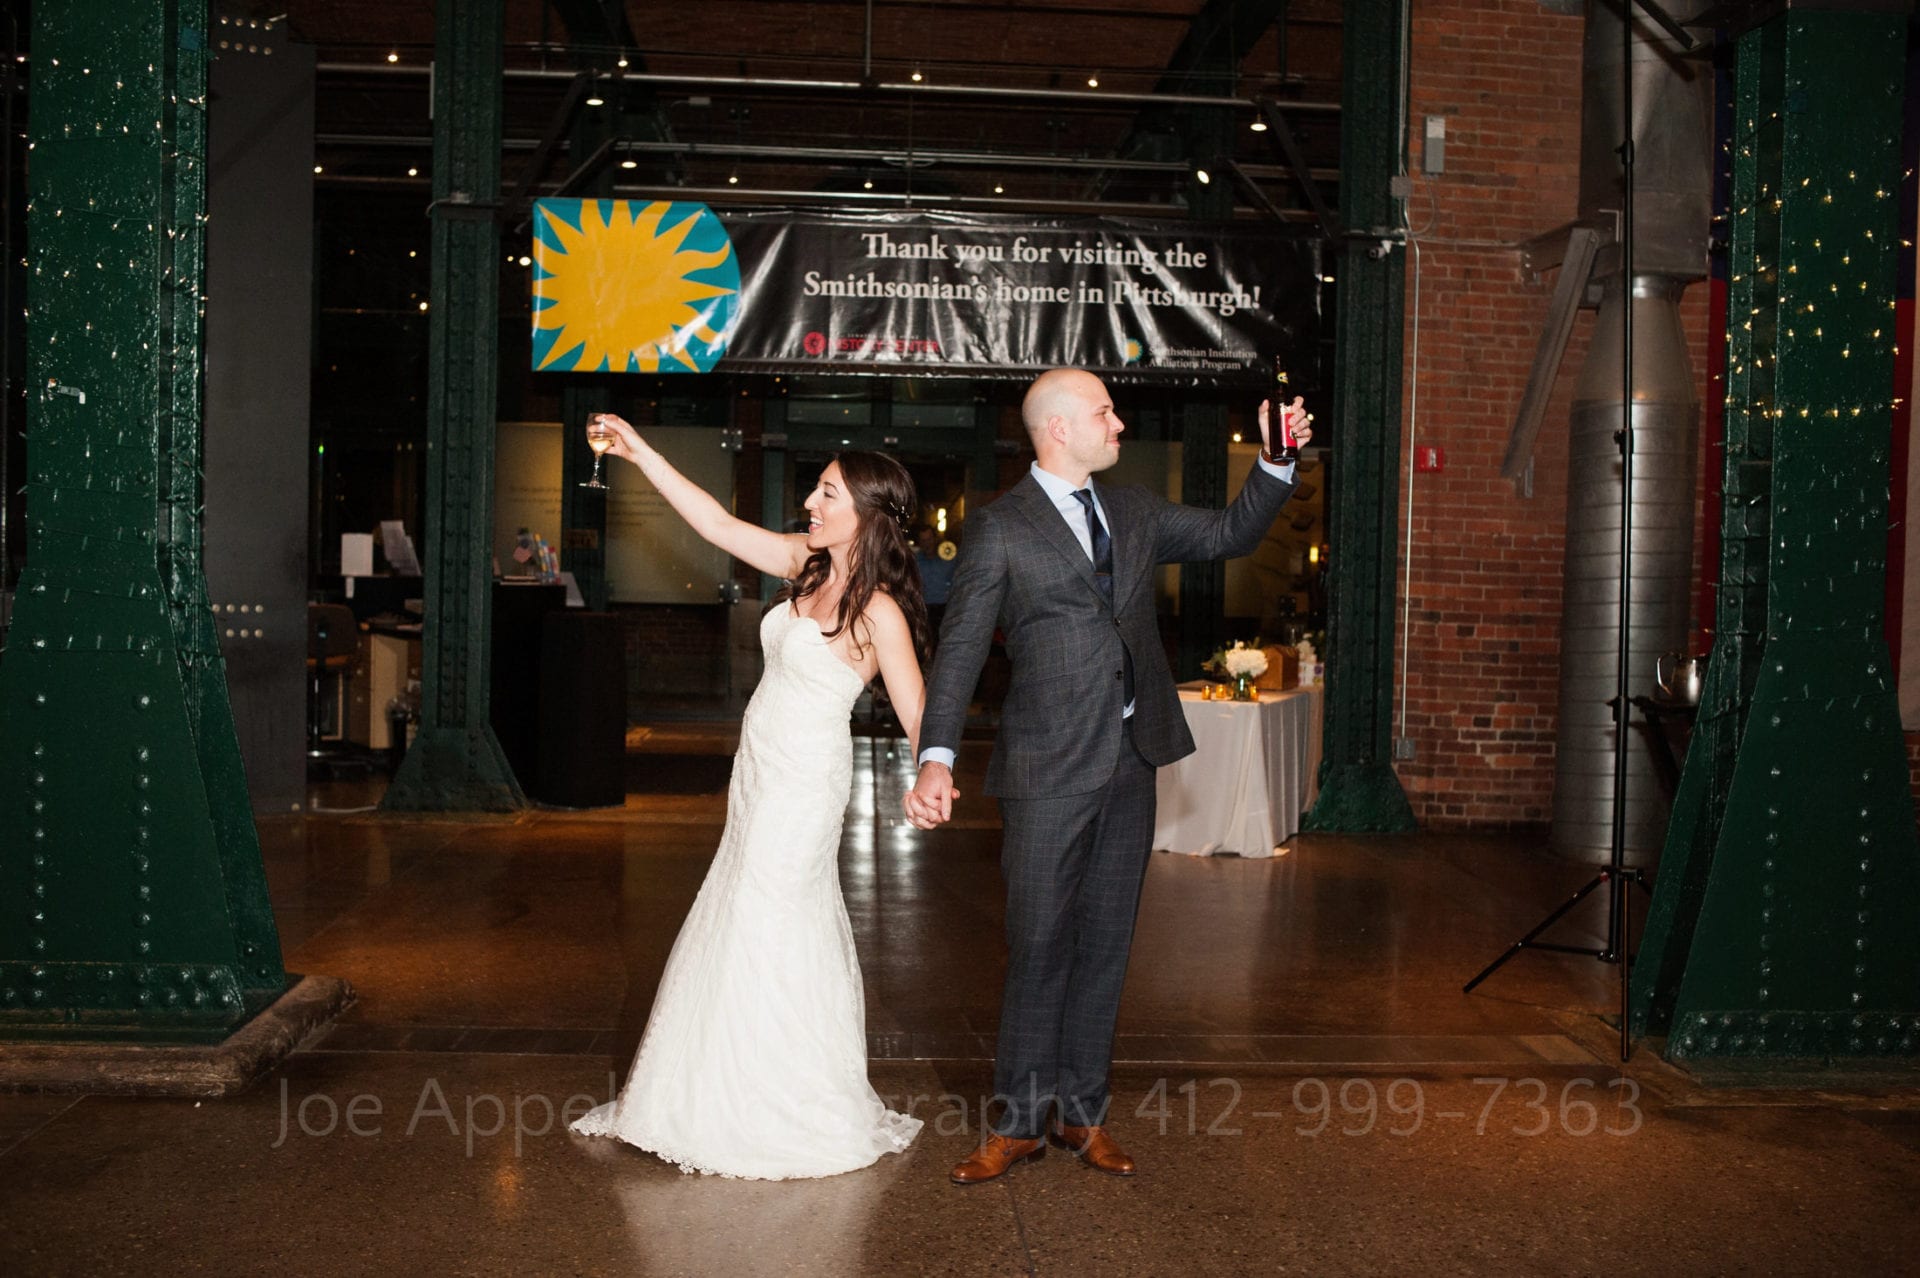 A couple enters the Great Hall at the Heinz History Center and turn away from each other while holding their glasses up to toast their guests.